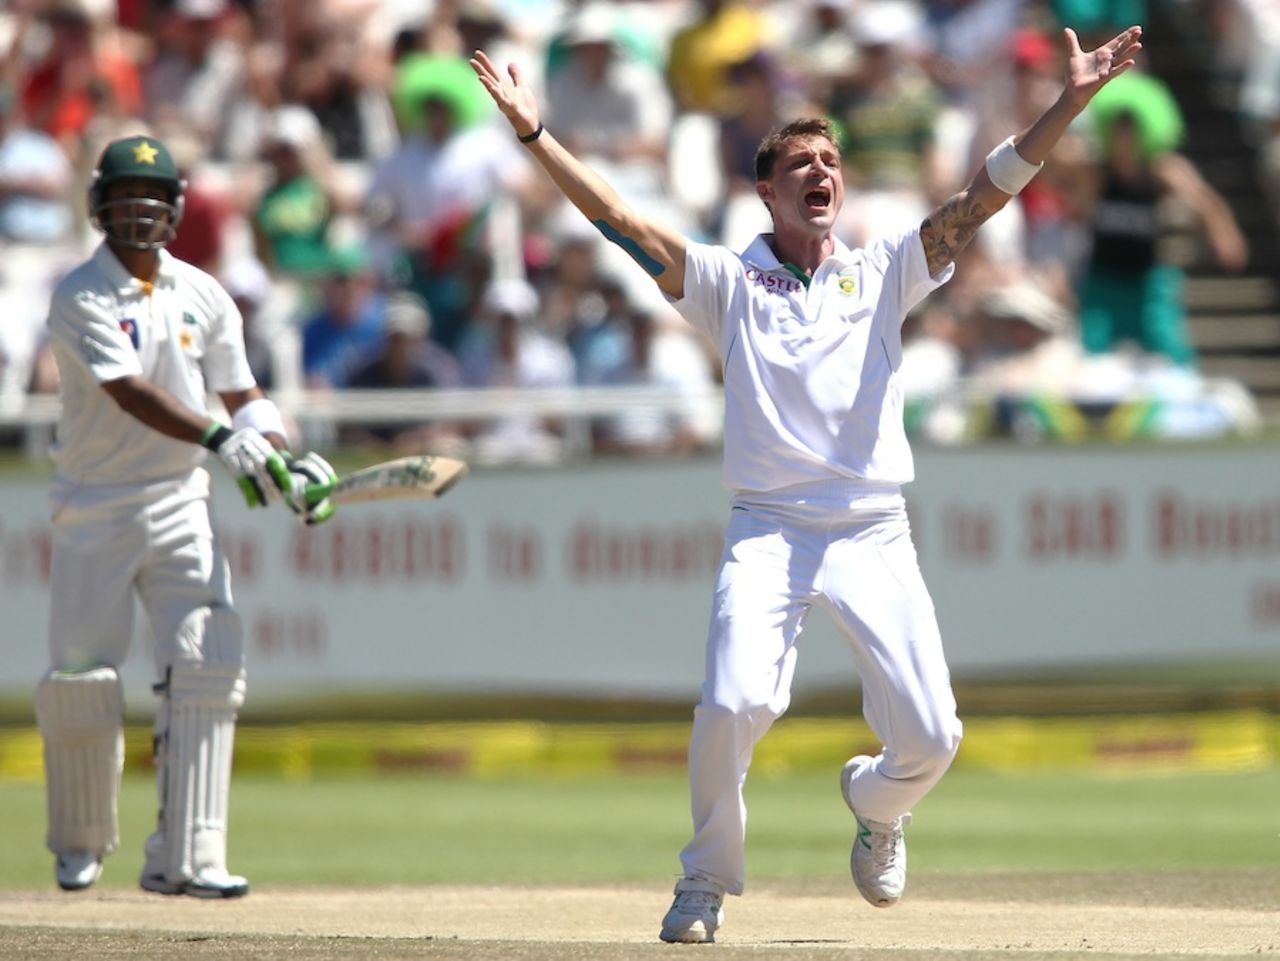 Dale Steyn appeals against Mohammad Hafeez, South Africa v Pakistan, 2nd Test, Cape Town, 3rd day, February 16, 2013